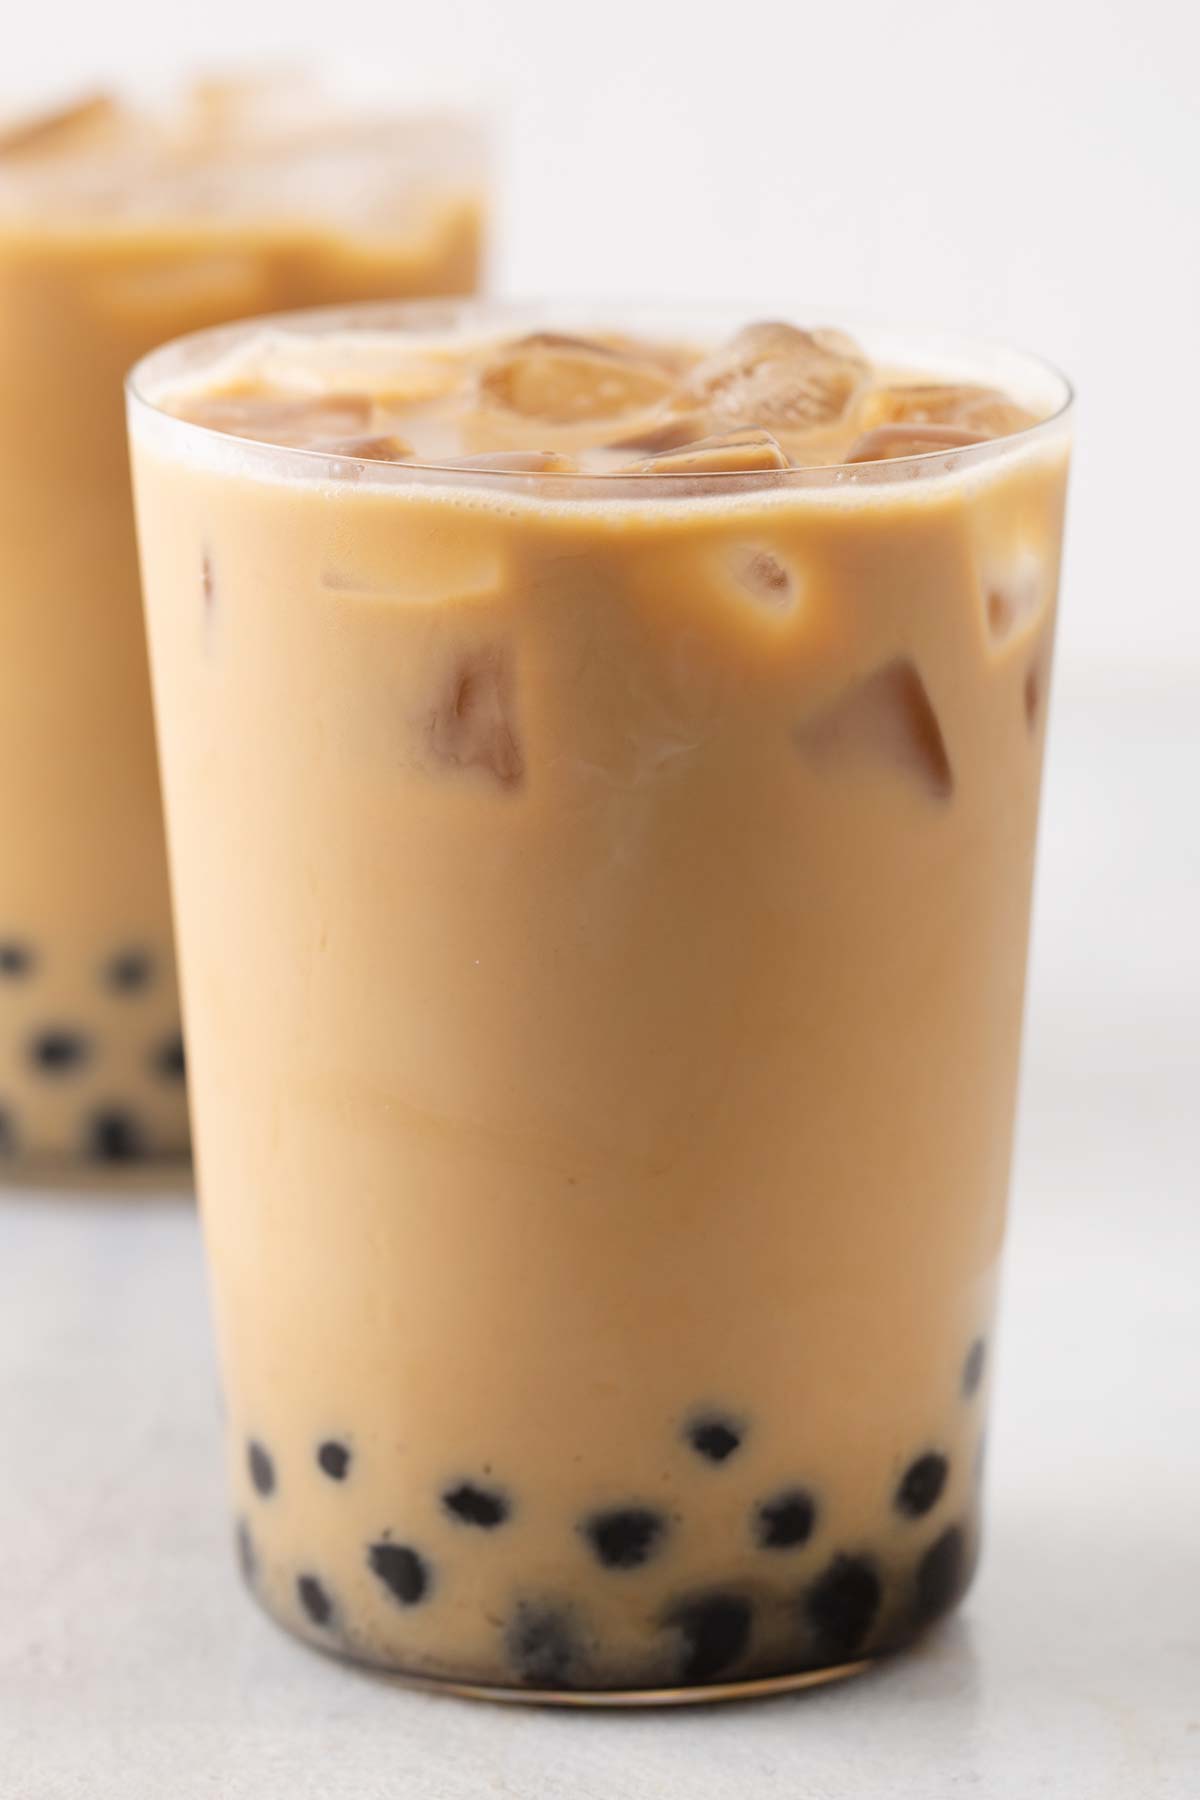 Iced Coffee Boba fully assembled in a clear glass.